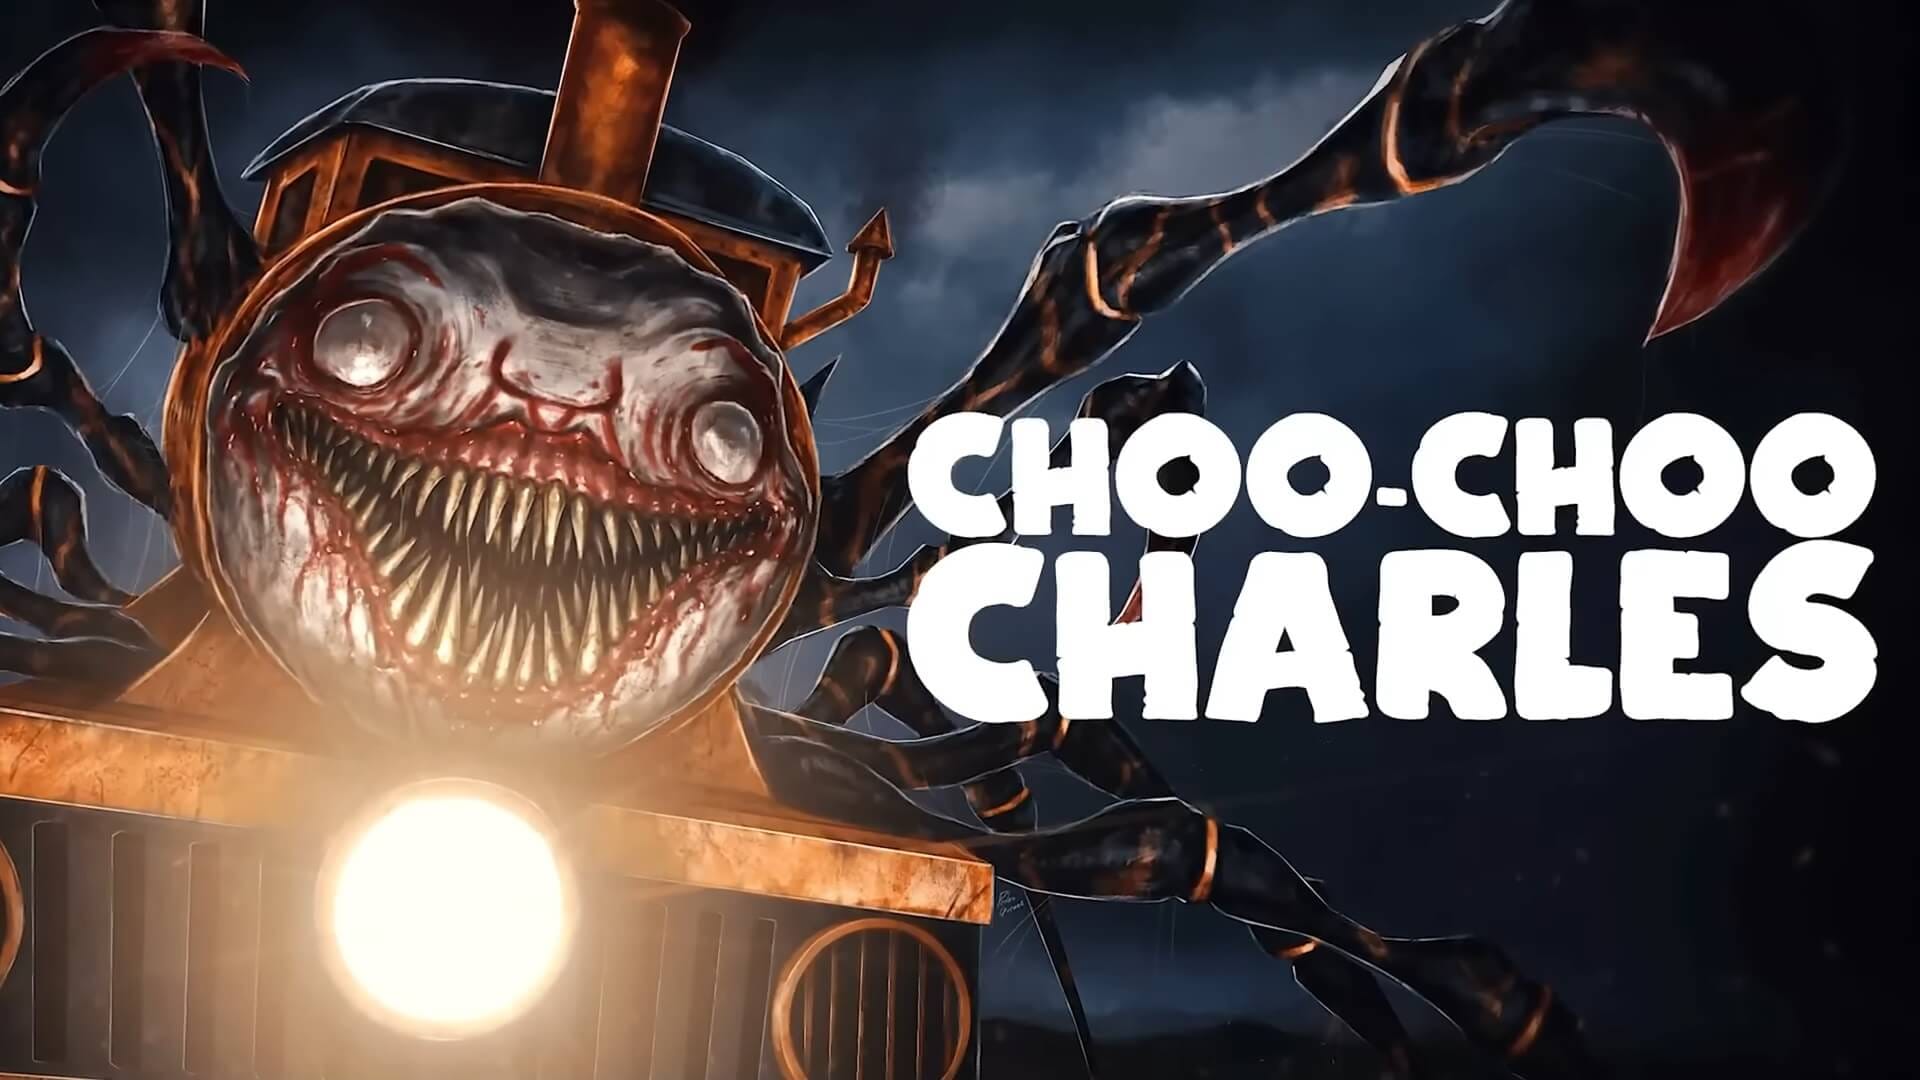 ChooChoo Charles is an upcoming survival horror game thats all about  trains  Gamesear